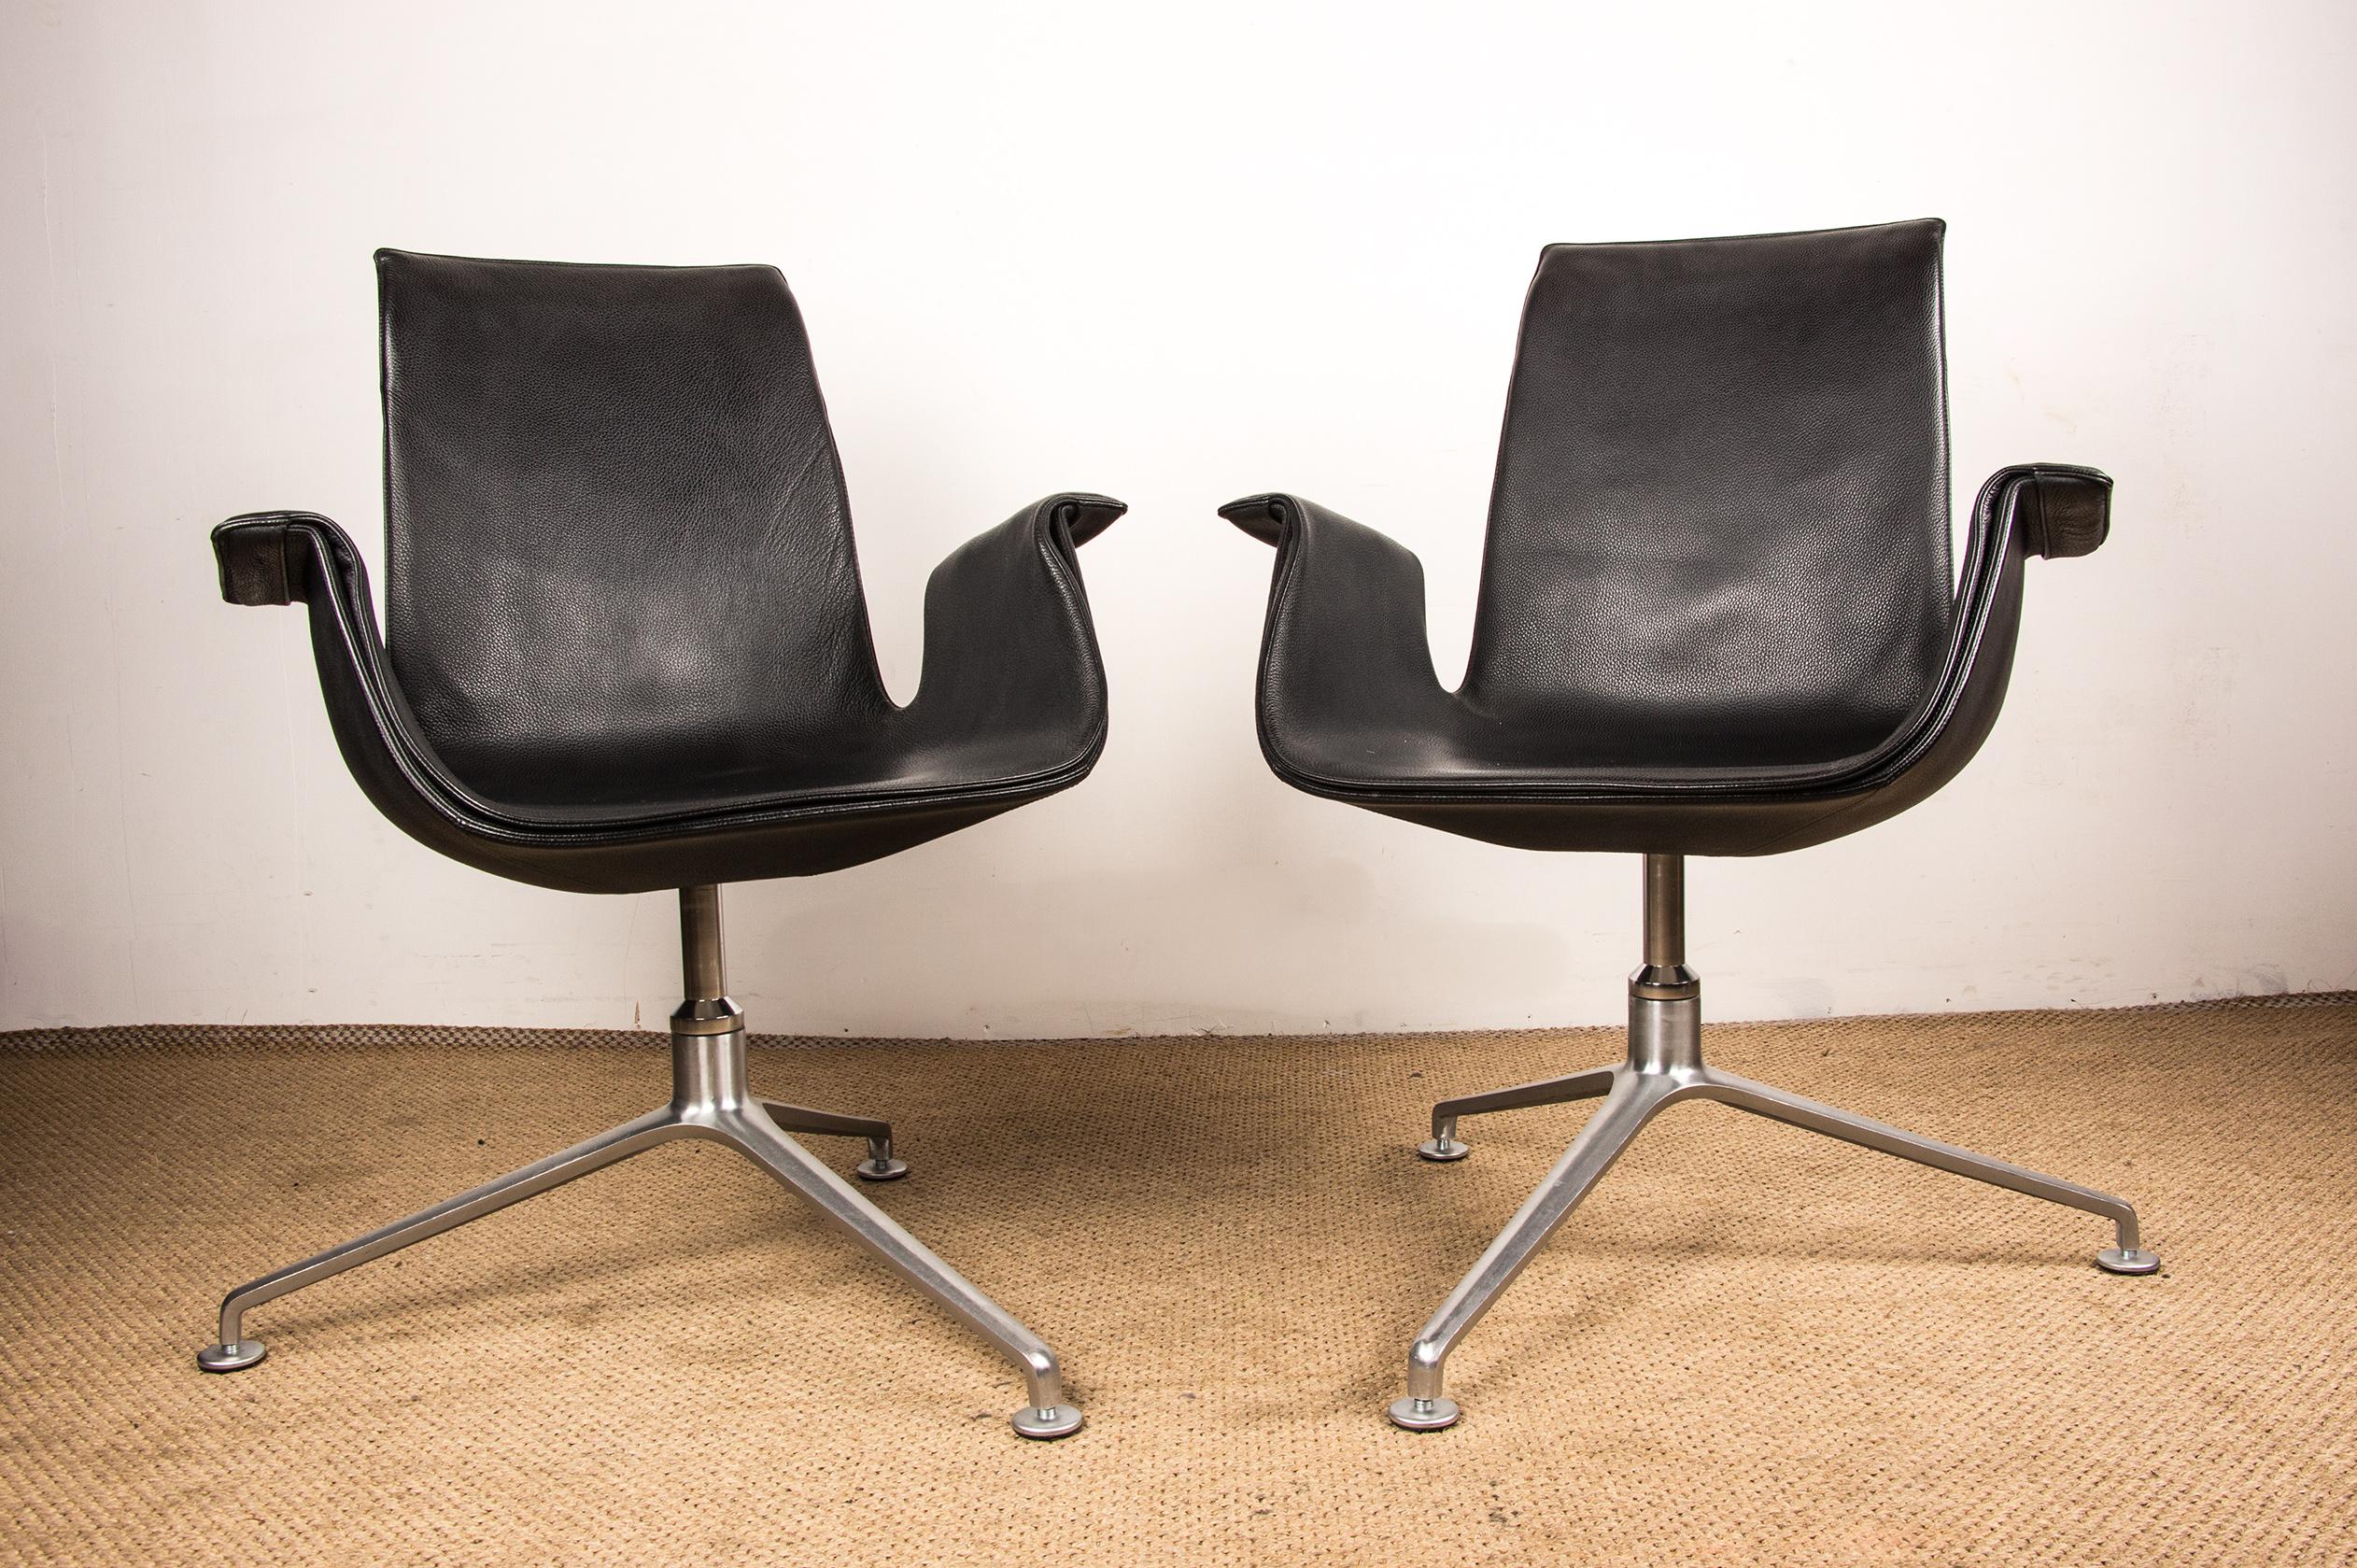 2 Danish deskchairs, Leather and steel, “Tulip chair” by Fabricius & Kalsthom. For Sale 5